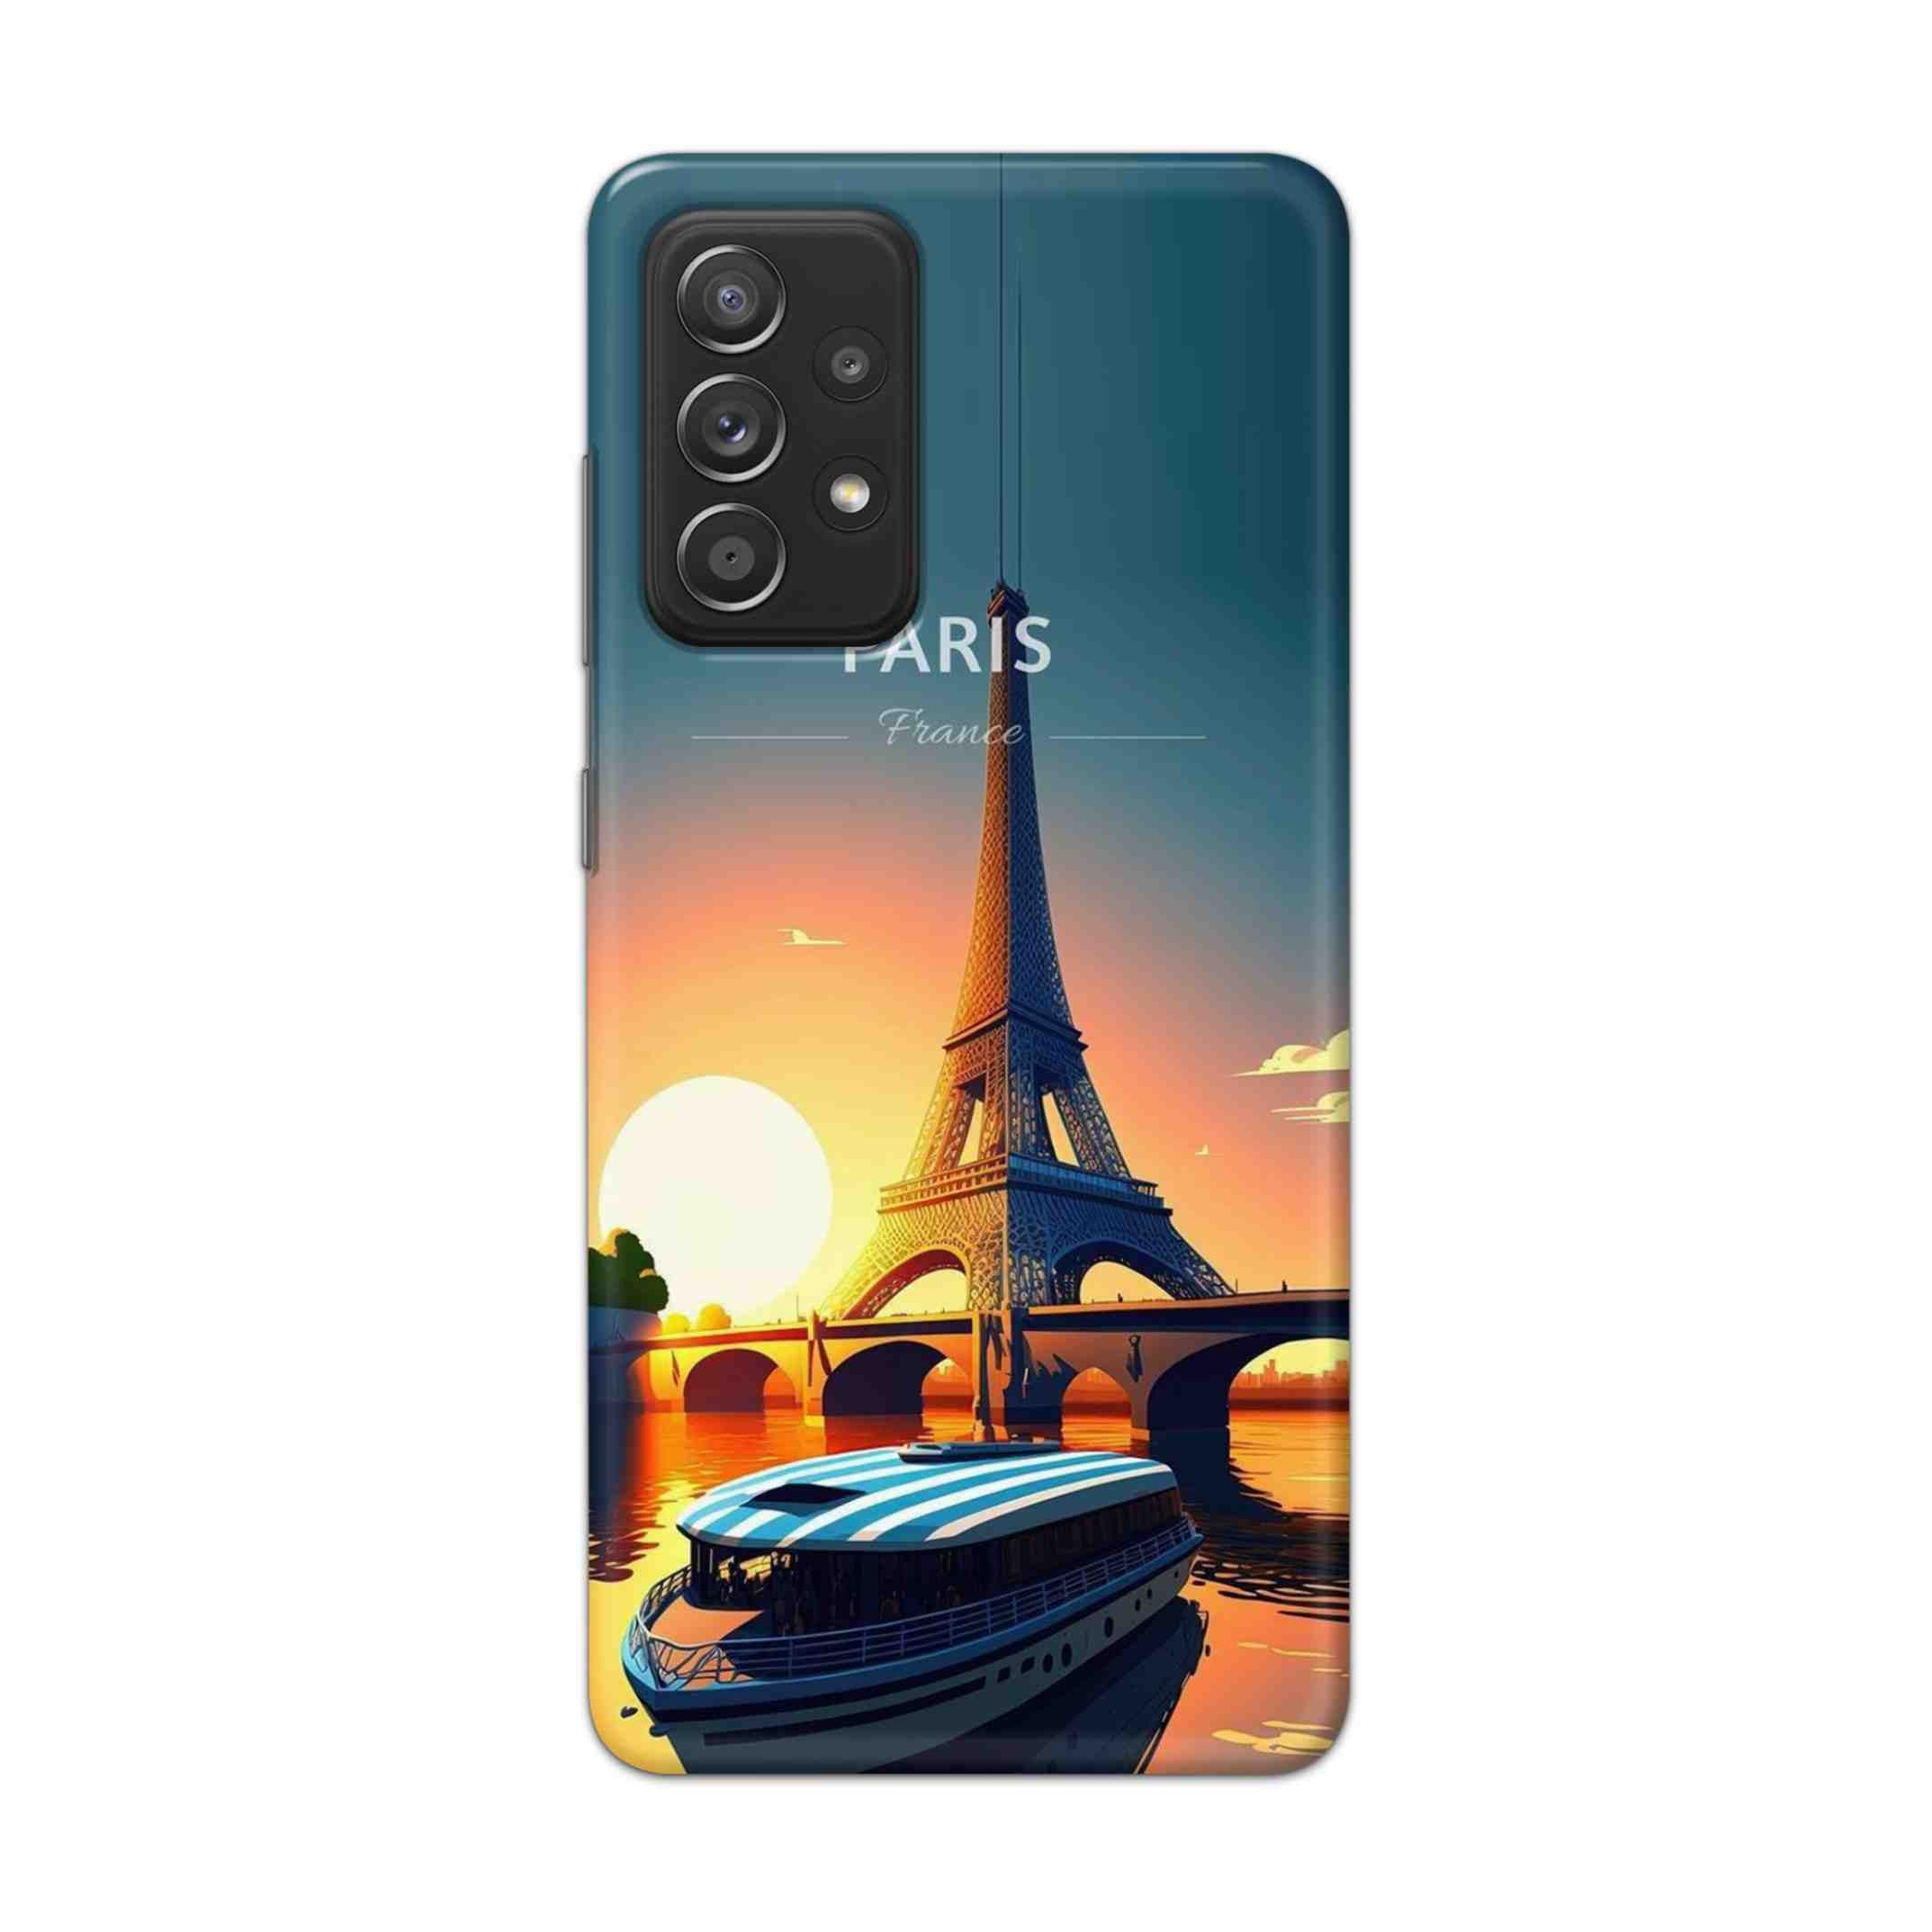 Buy France Hard Back Mobile Phone Case Cover For Samsung Galaxy A52 Online